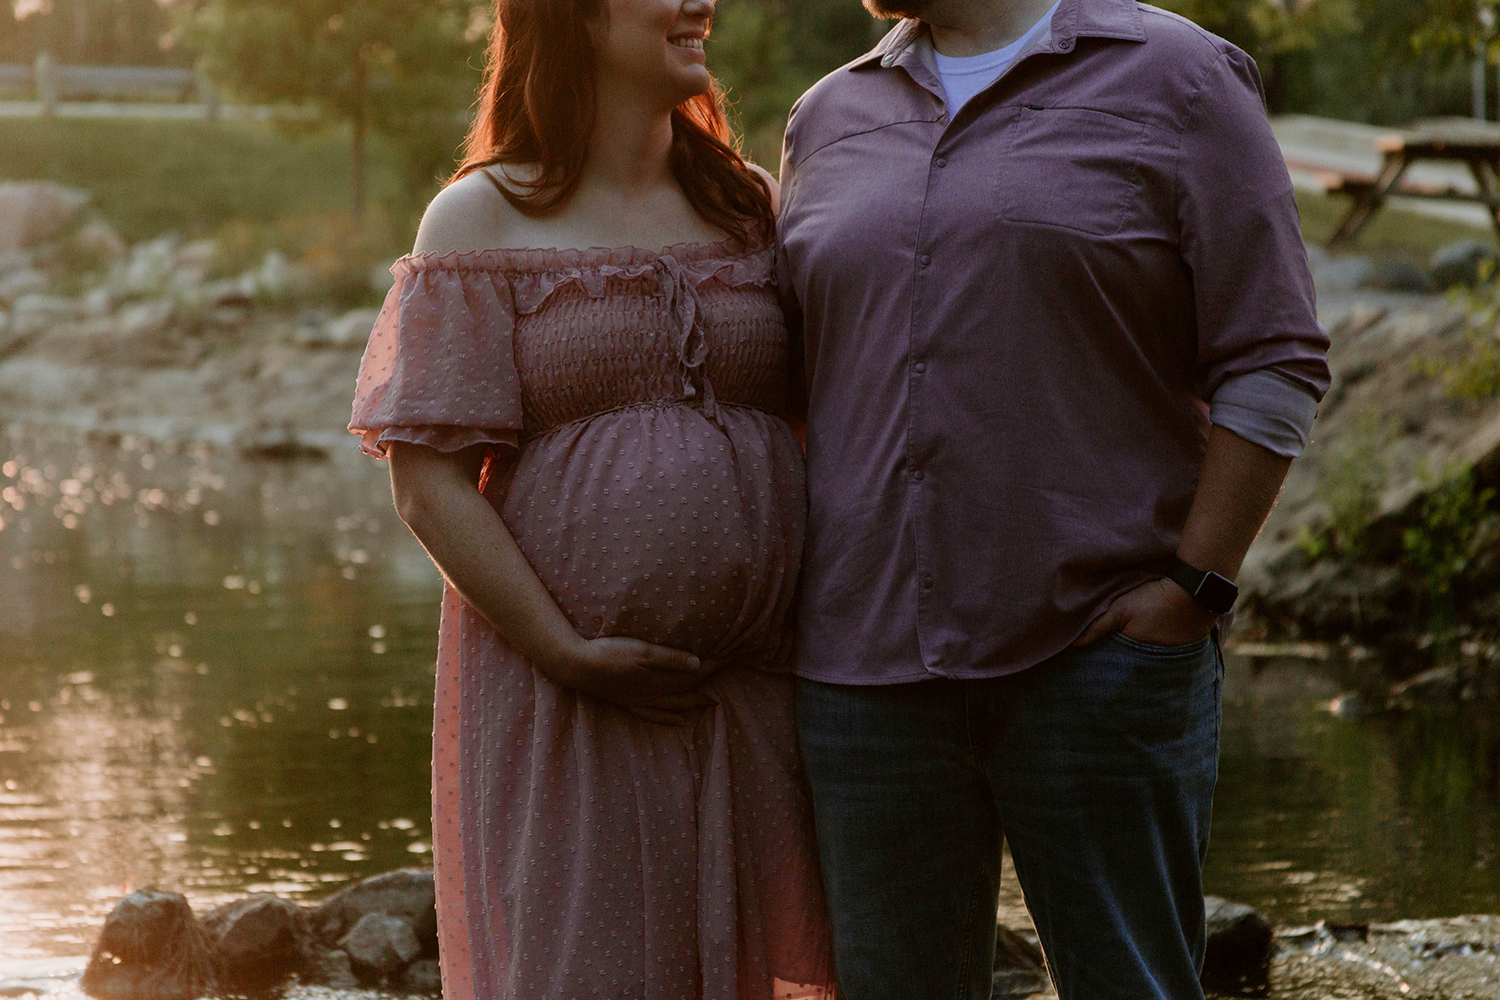 Maternity session at Sharon Mills Park in Manchester, Michigan.